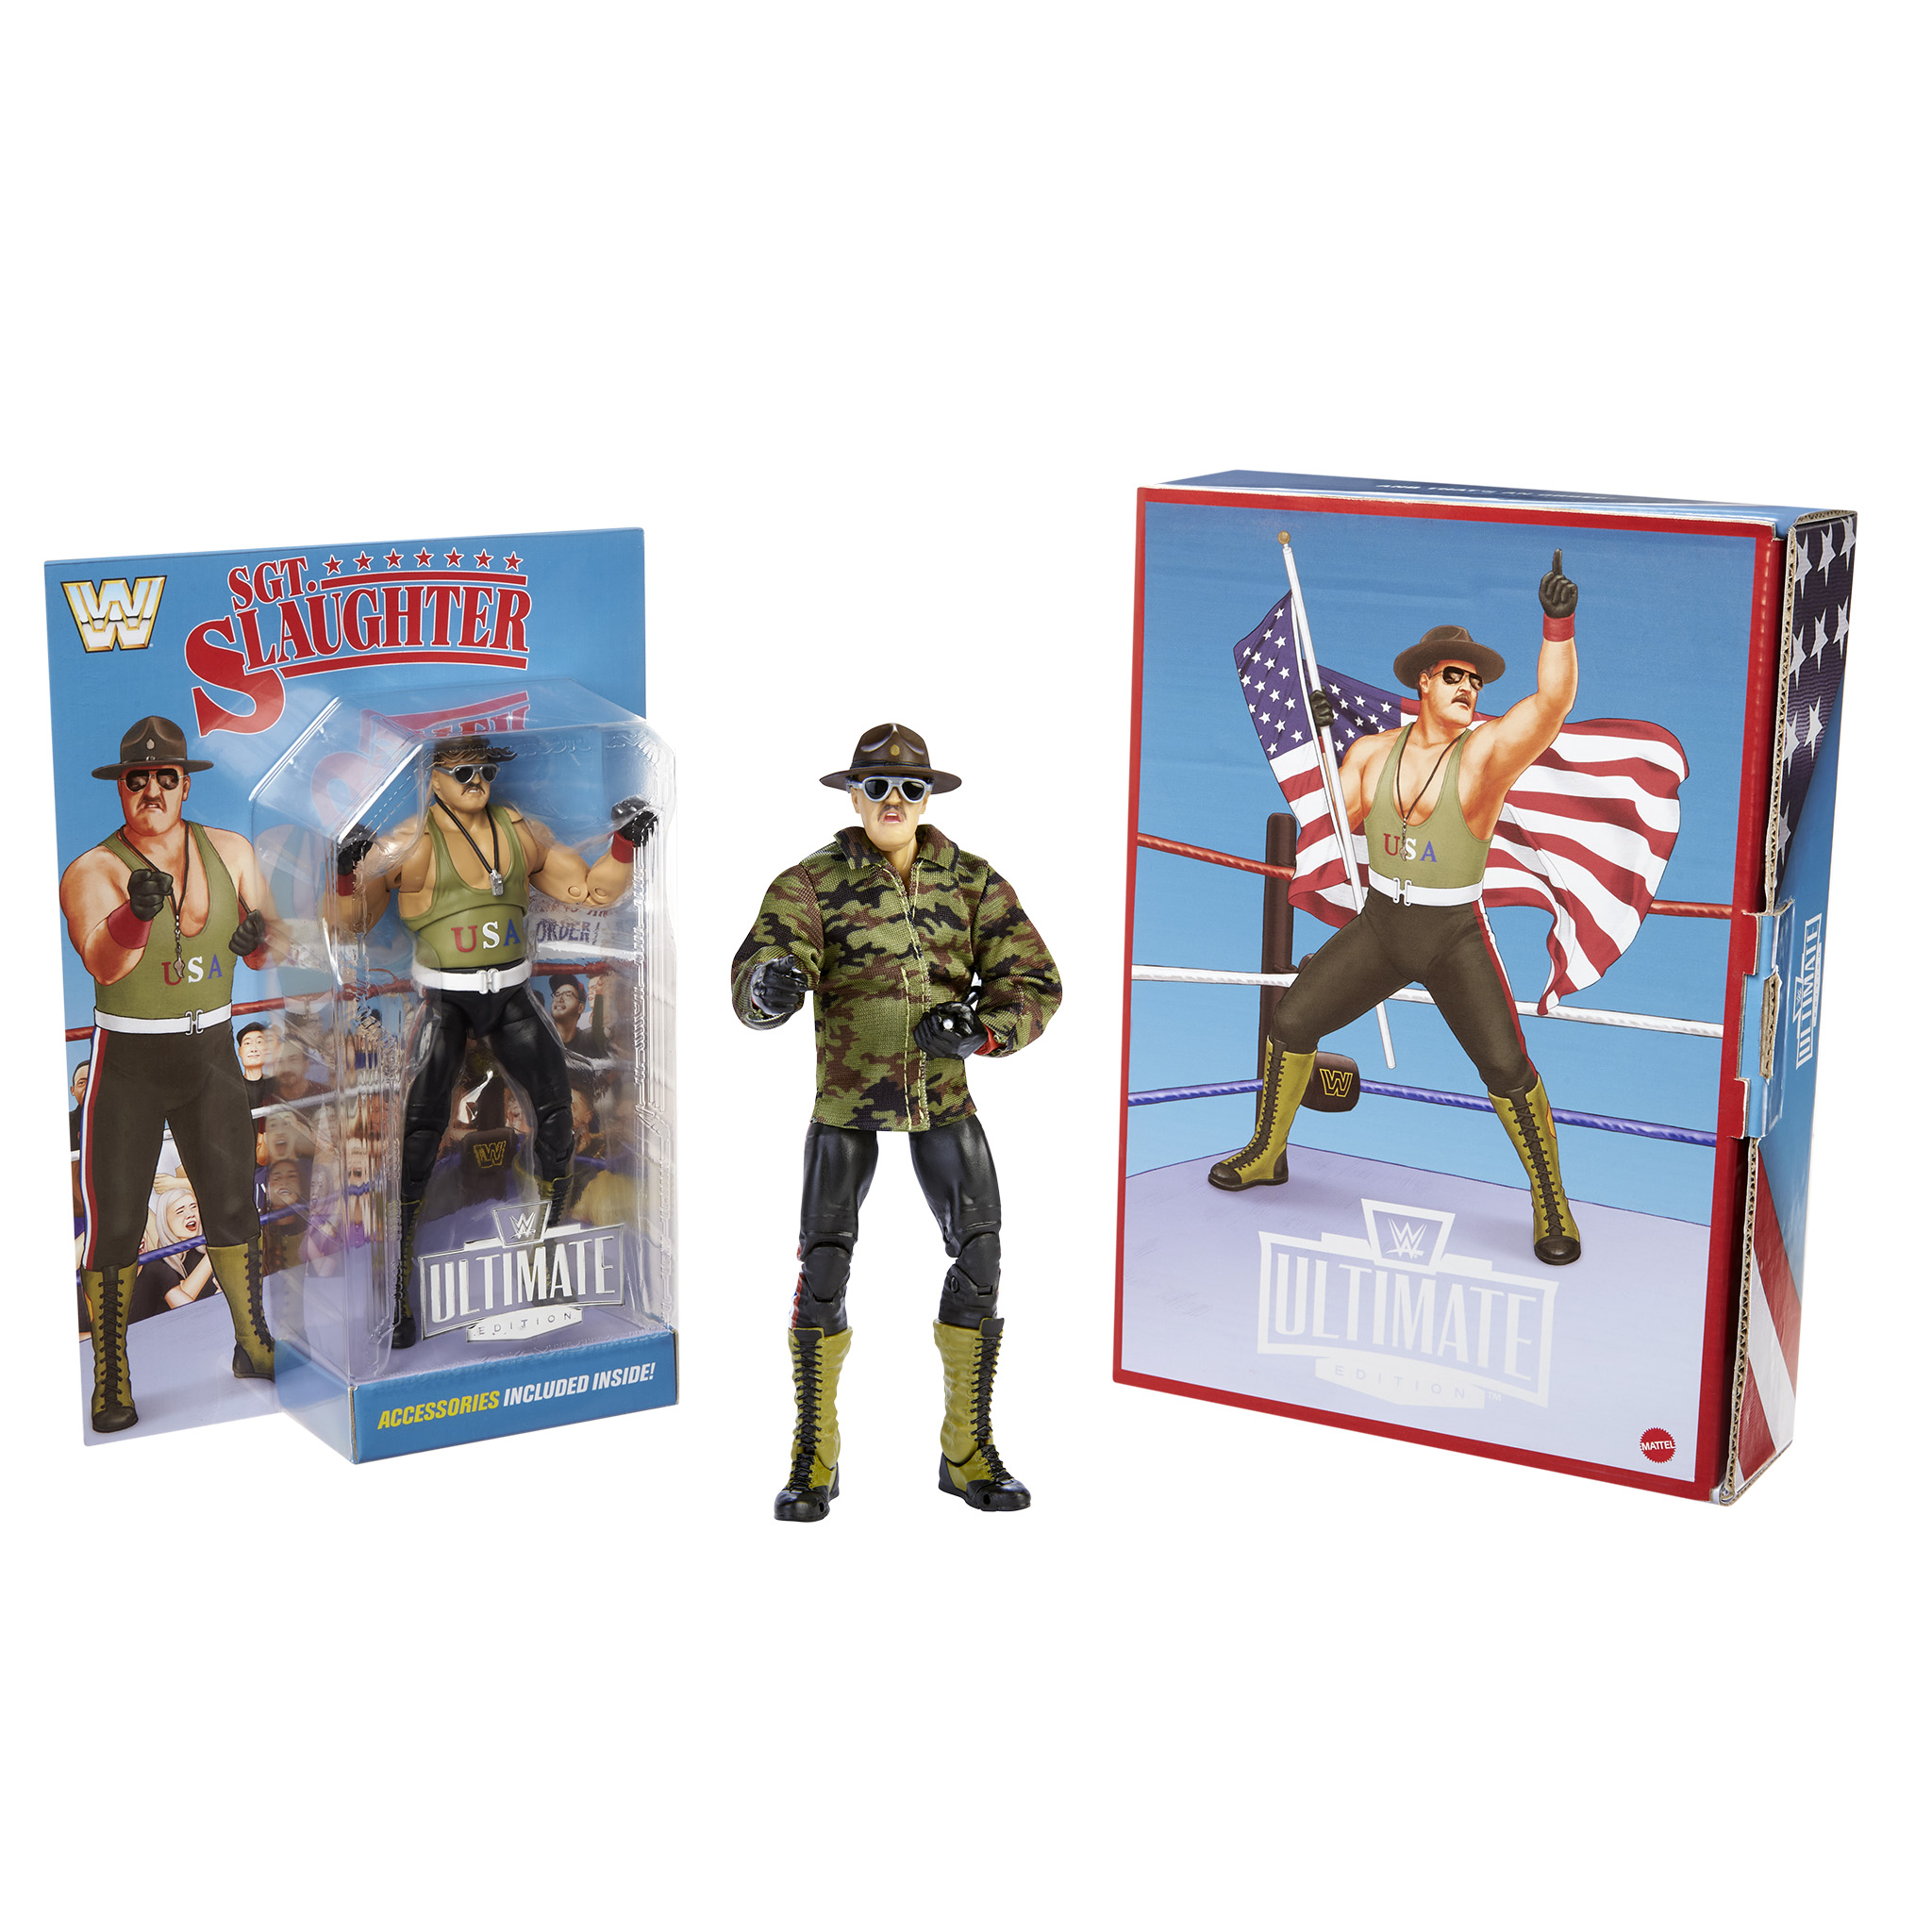 WWE Ultimate Edition Sgt. Slaughter 3